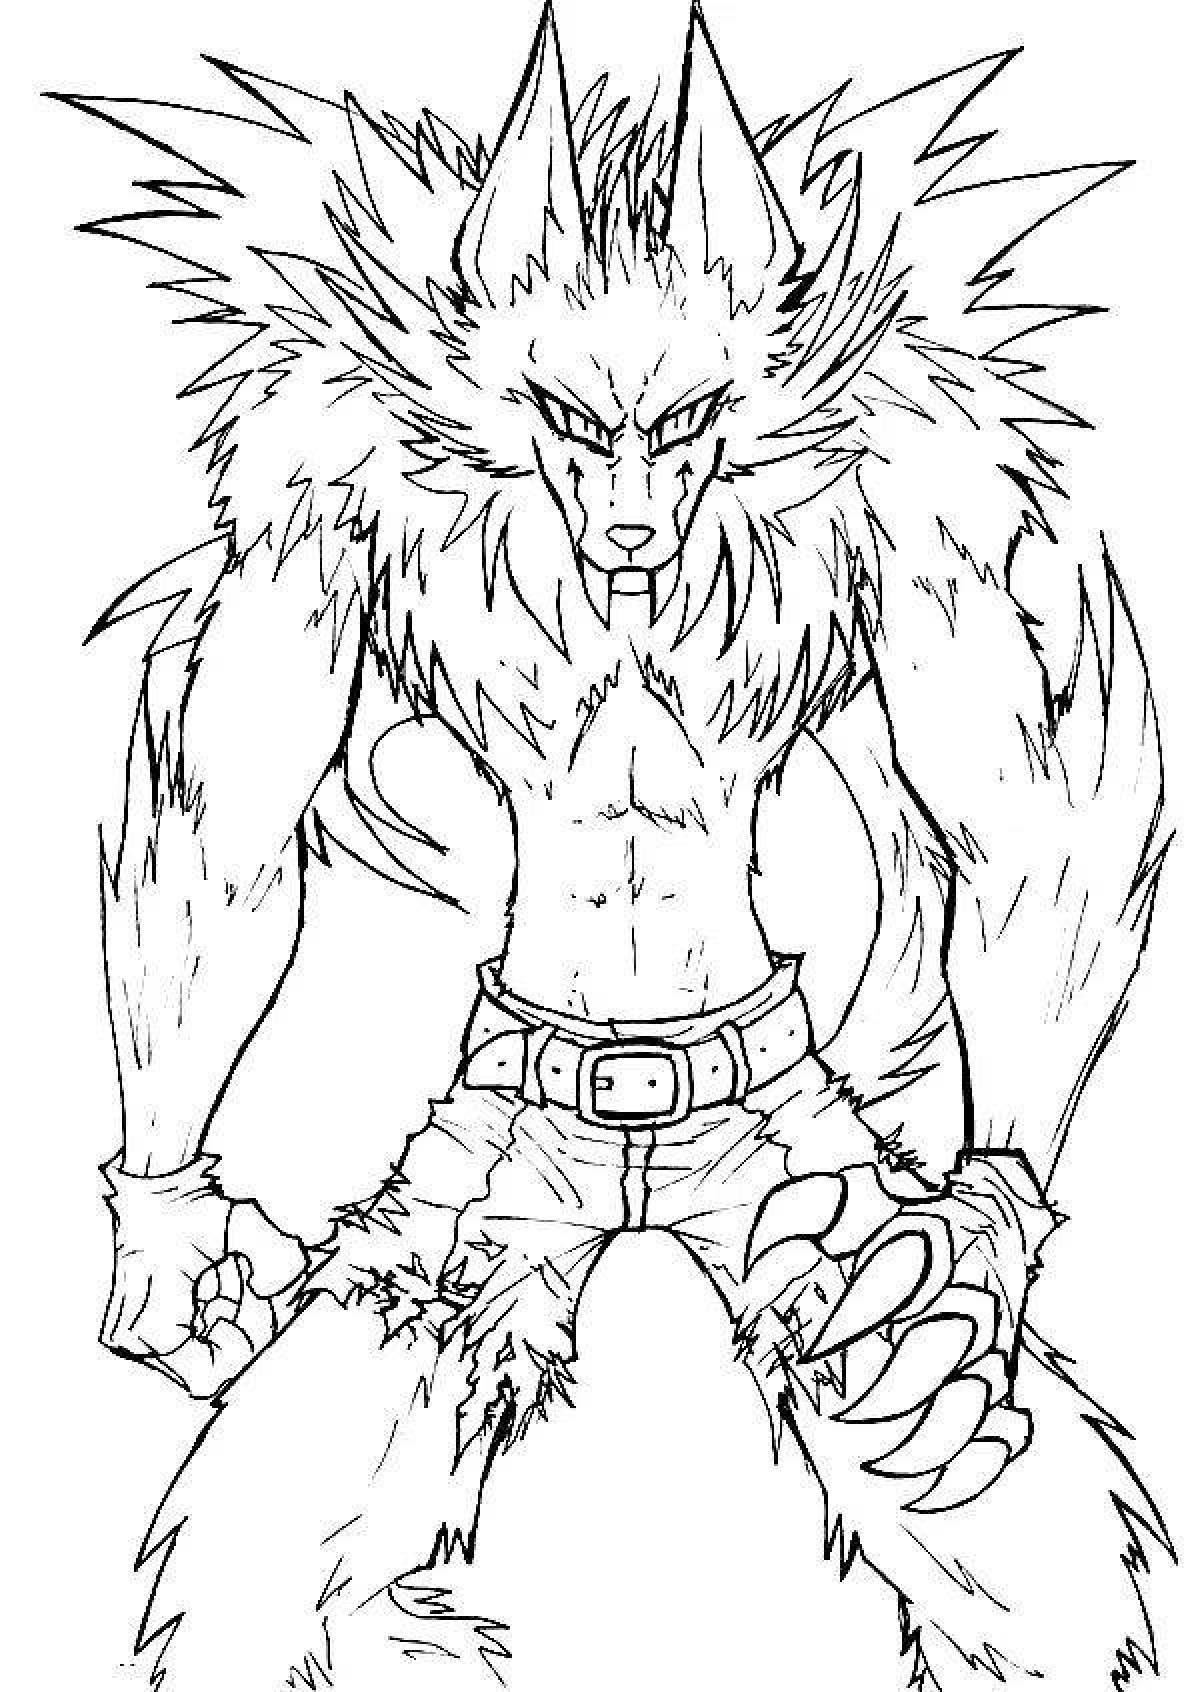 Werewolf leon ugly coloring page